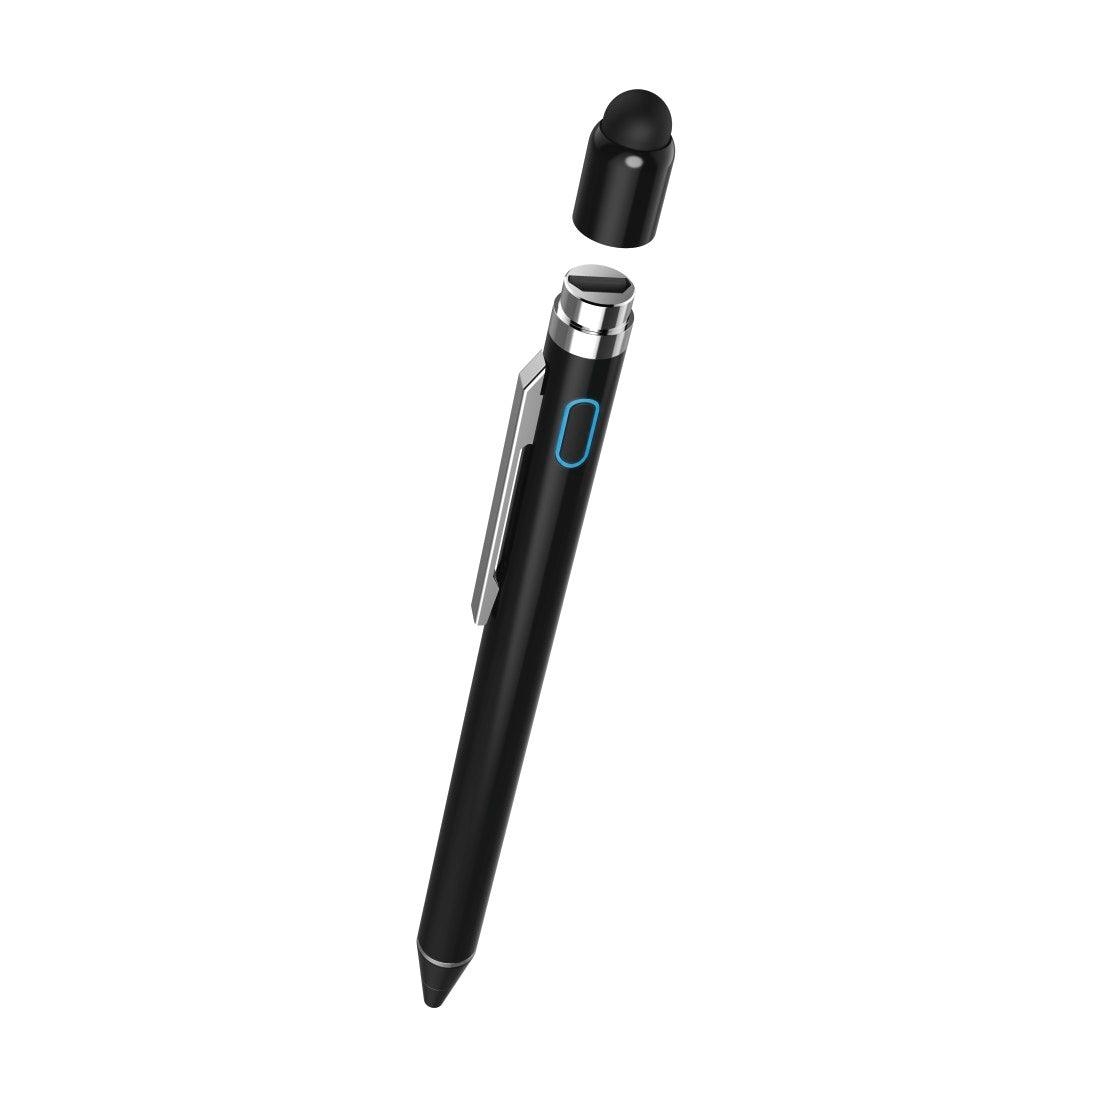 Hama Pro Active Stylus with Ultra-Fine 1.5 mm Tip for Tablets - Black | 395894 (7519327387836)